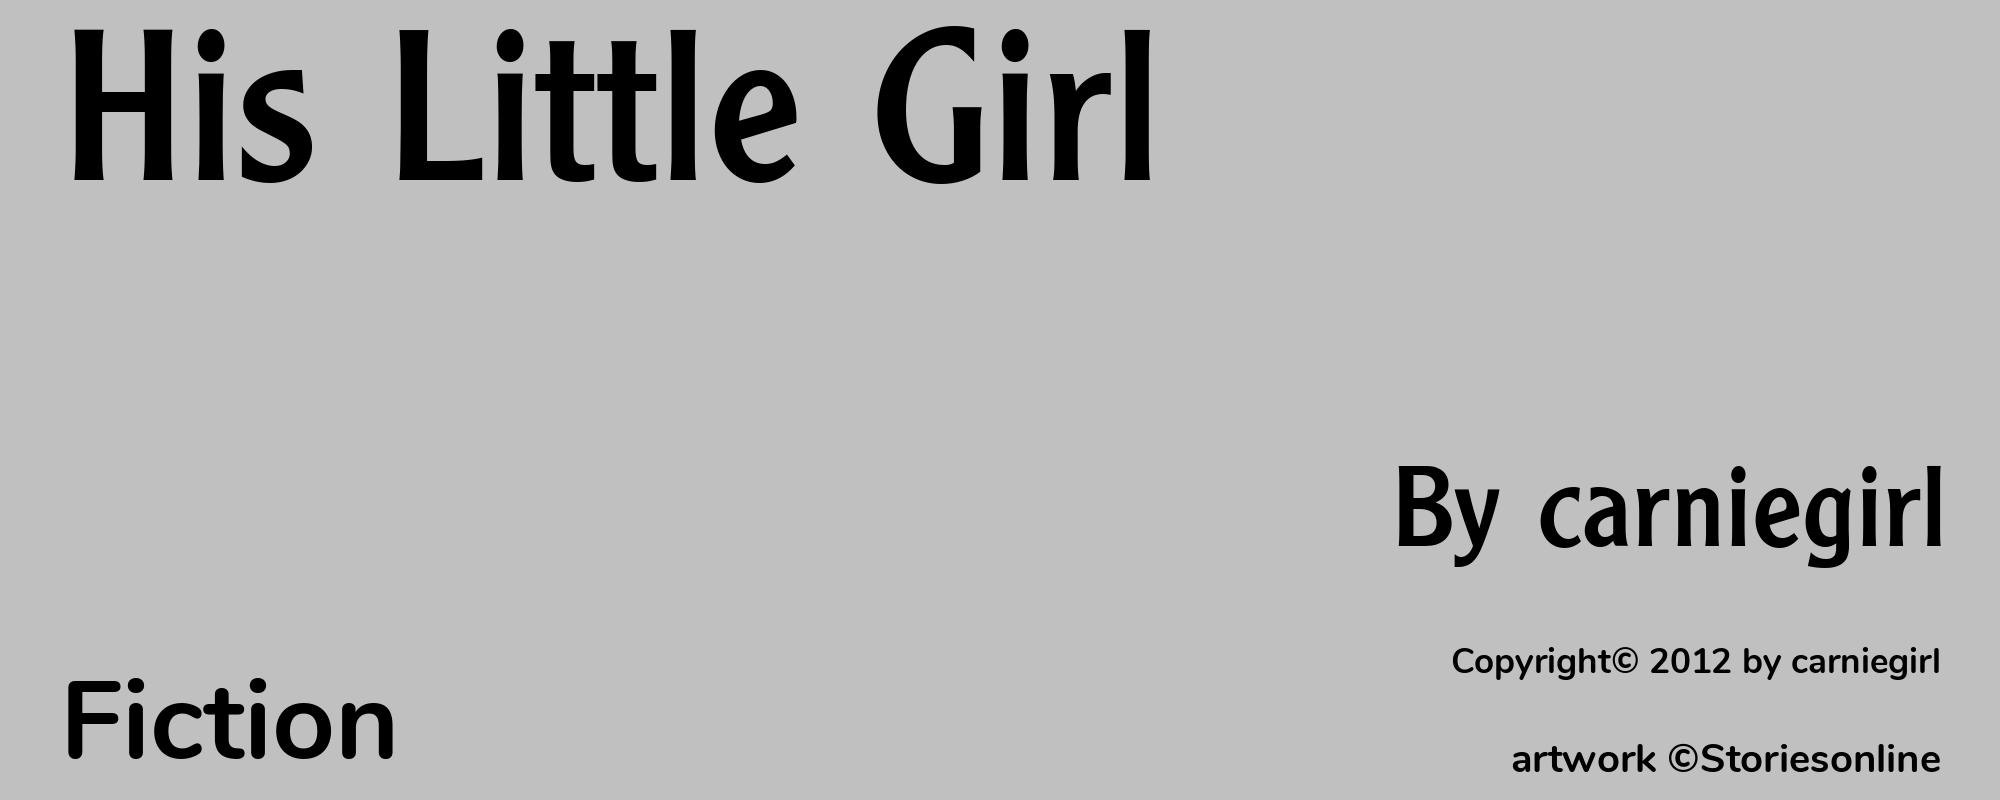 His Little Girl - Cover